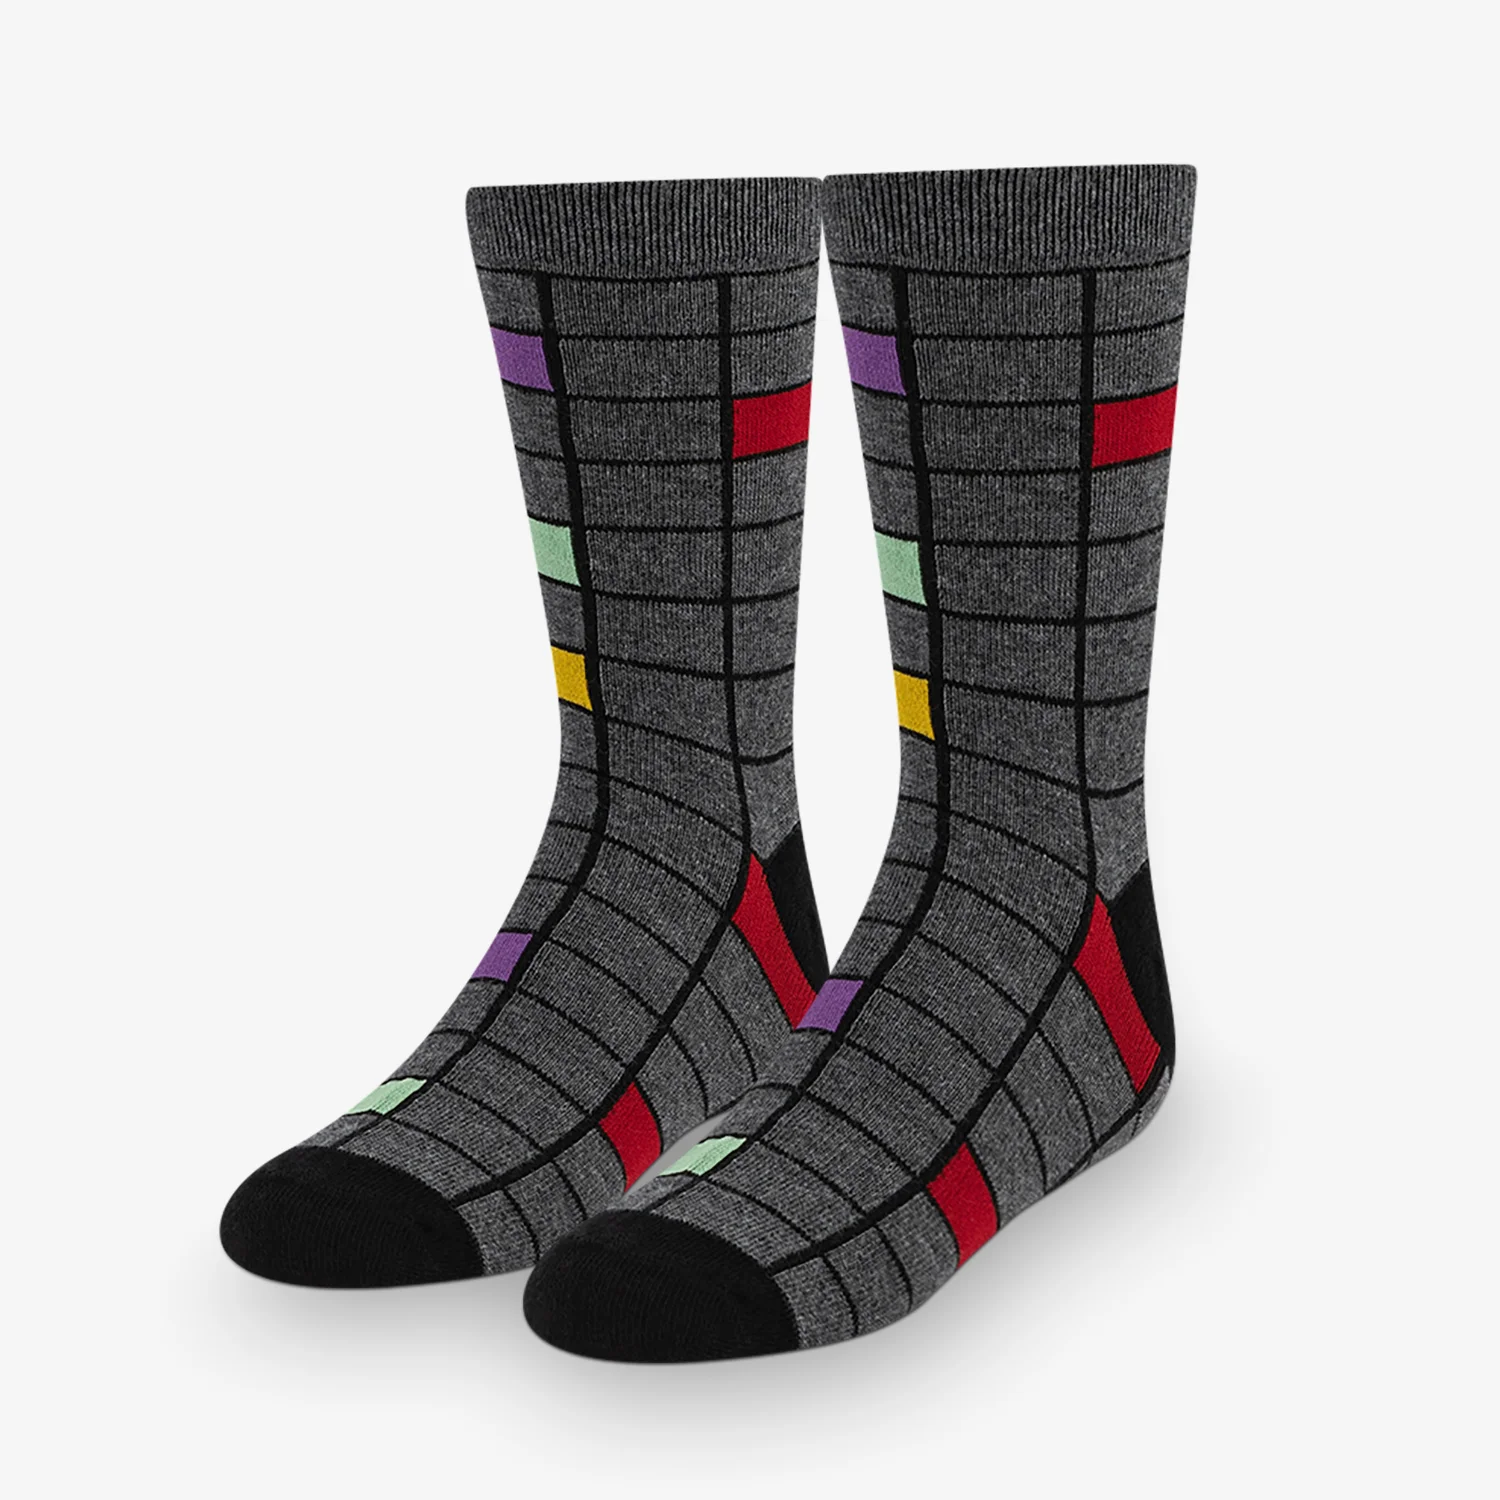 A pair of grey socks with colorful squares on them.